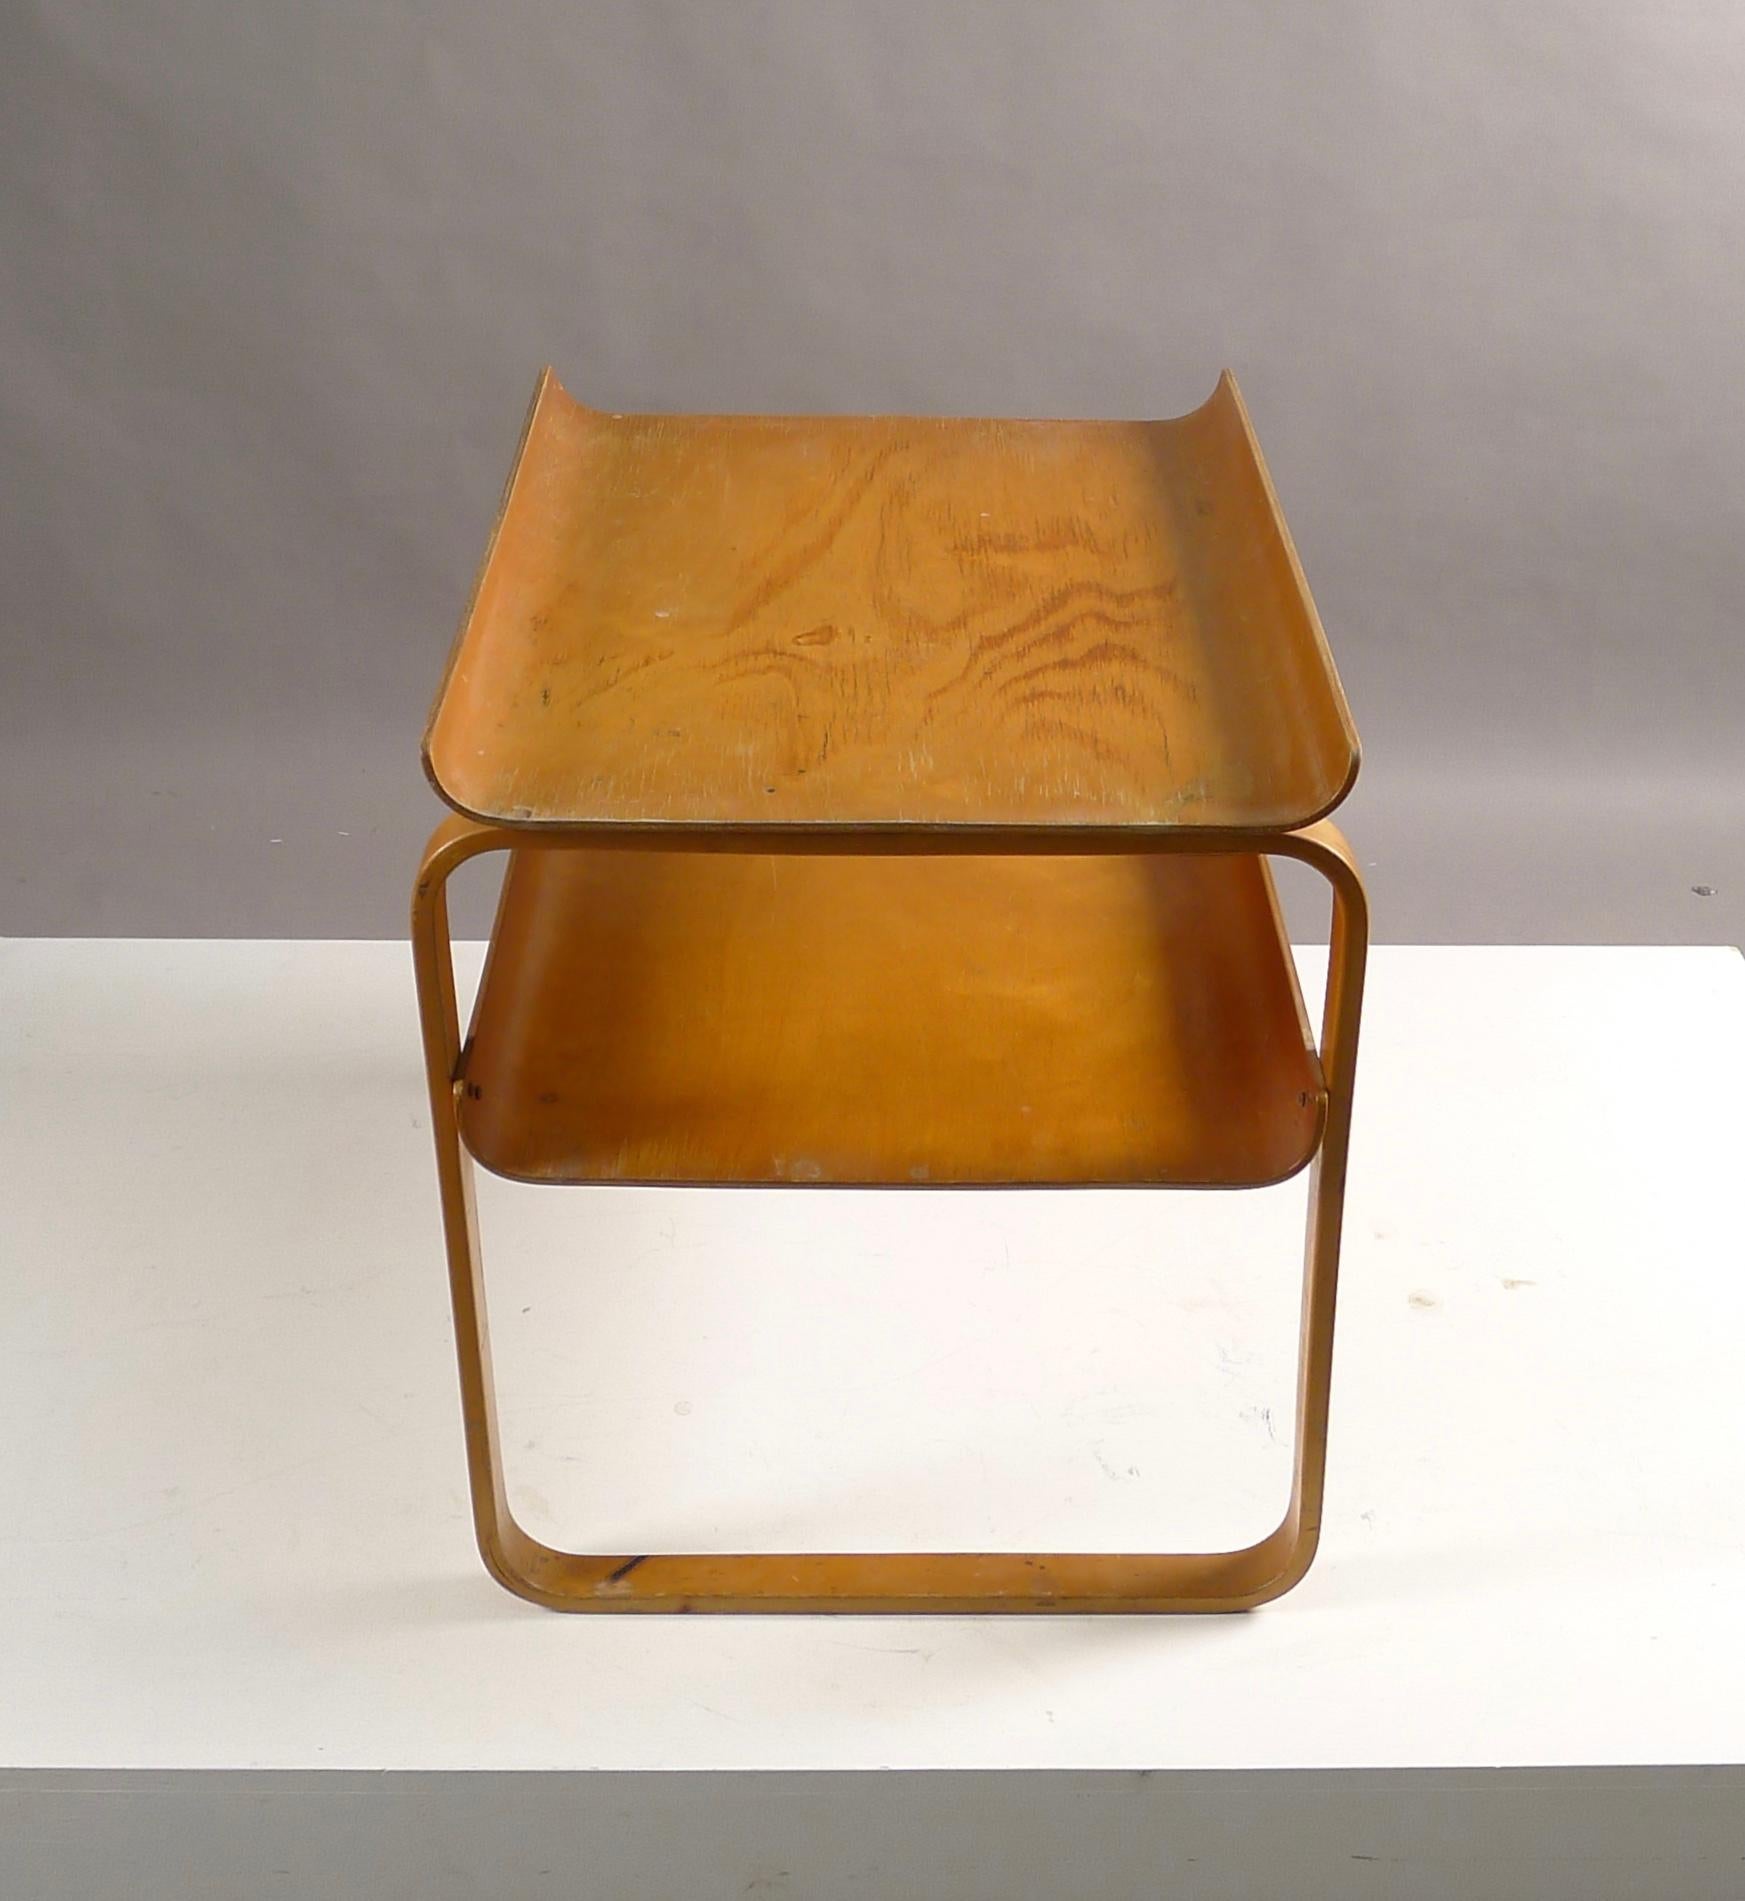 Finnish Alvar Aalto , Two Tier Plywood Table , model 915 , stamped Finsven , 1940's . 